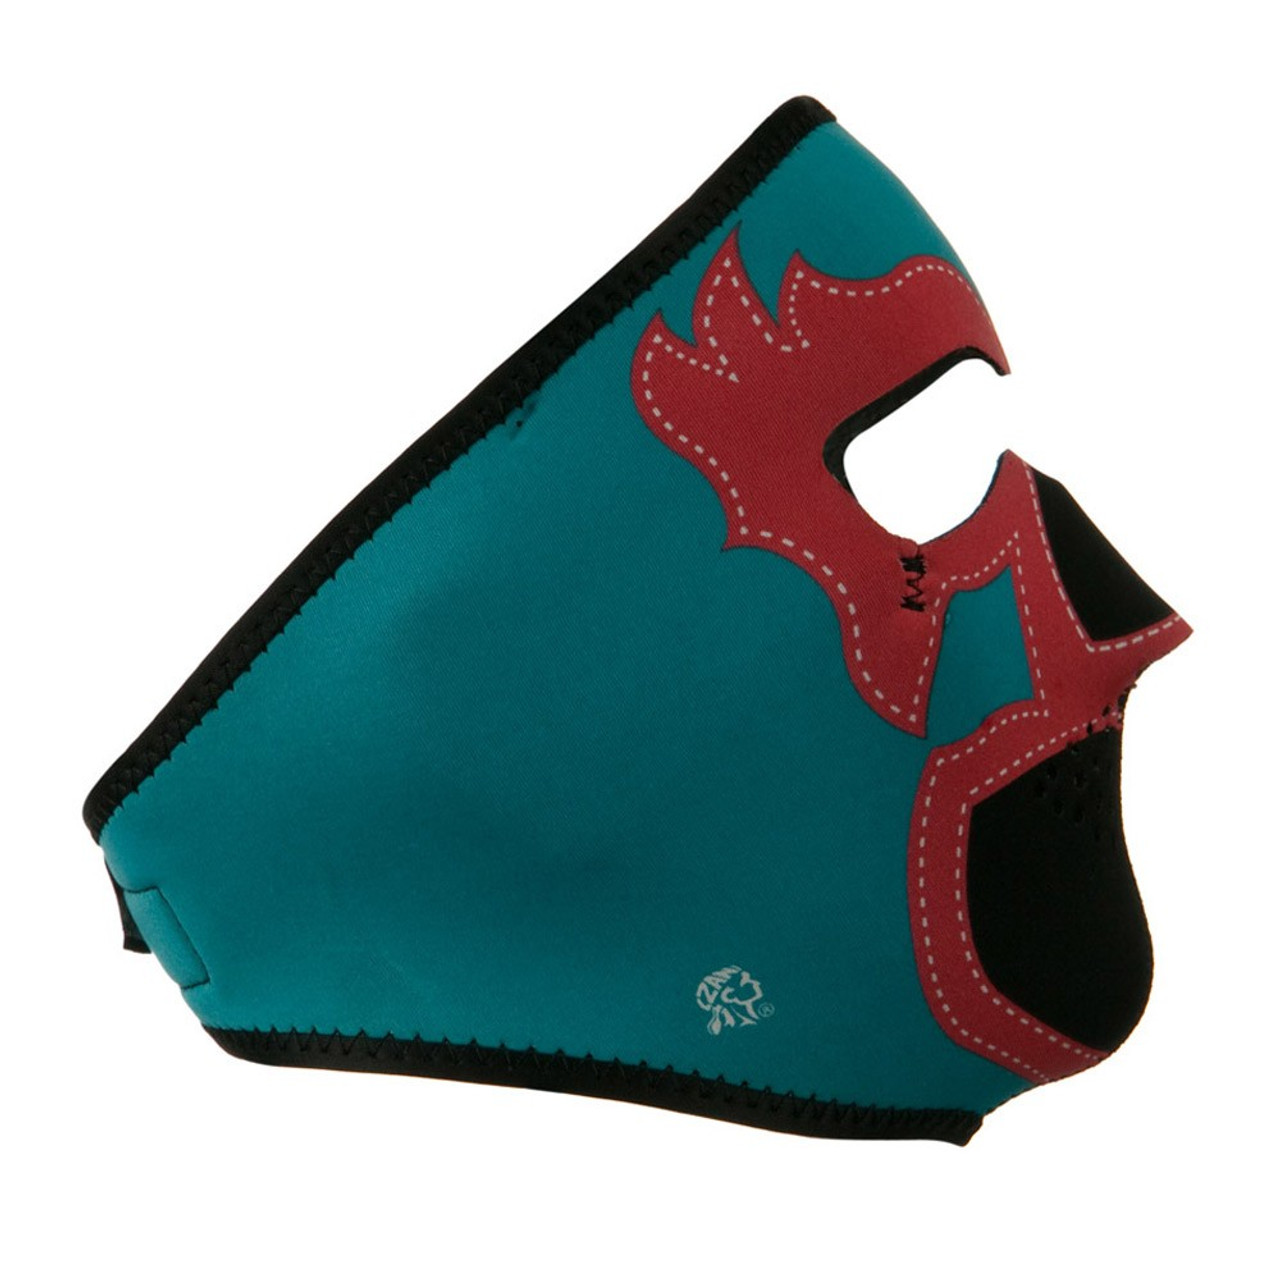 https://cdn11.bigcommerce.com/s-a9579/images/stencil/1280x1280/products/3372/4128/neoprene_full_face_mask_lucha_libre__64640.1358346701.jpg?c=2